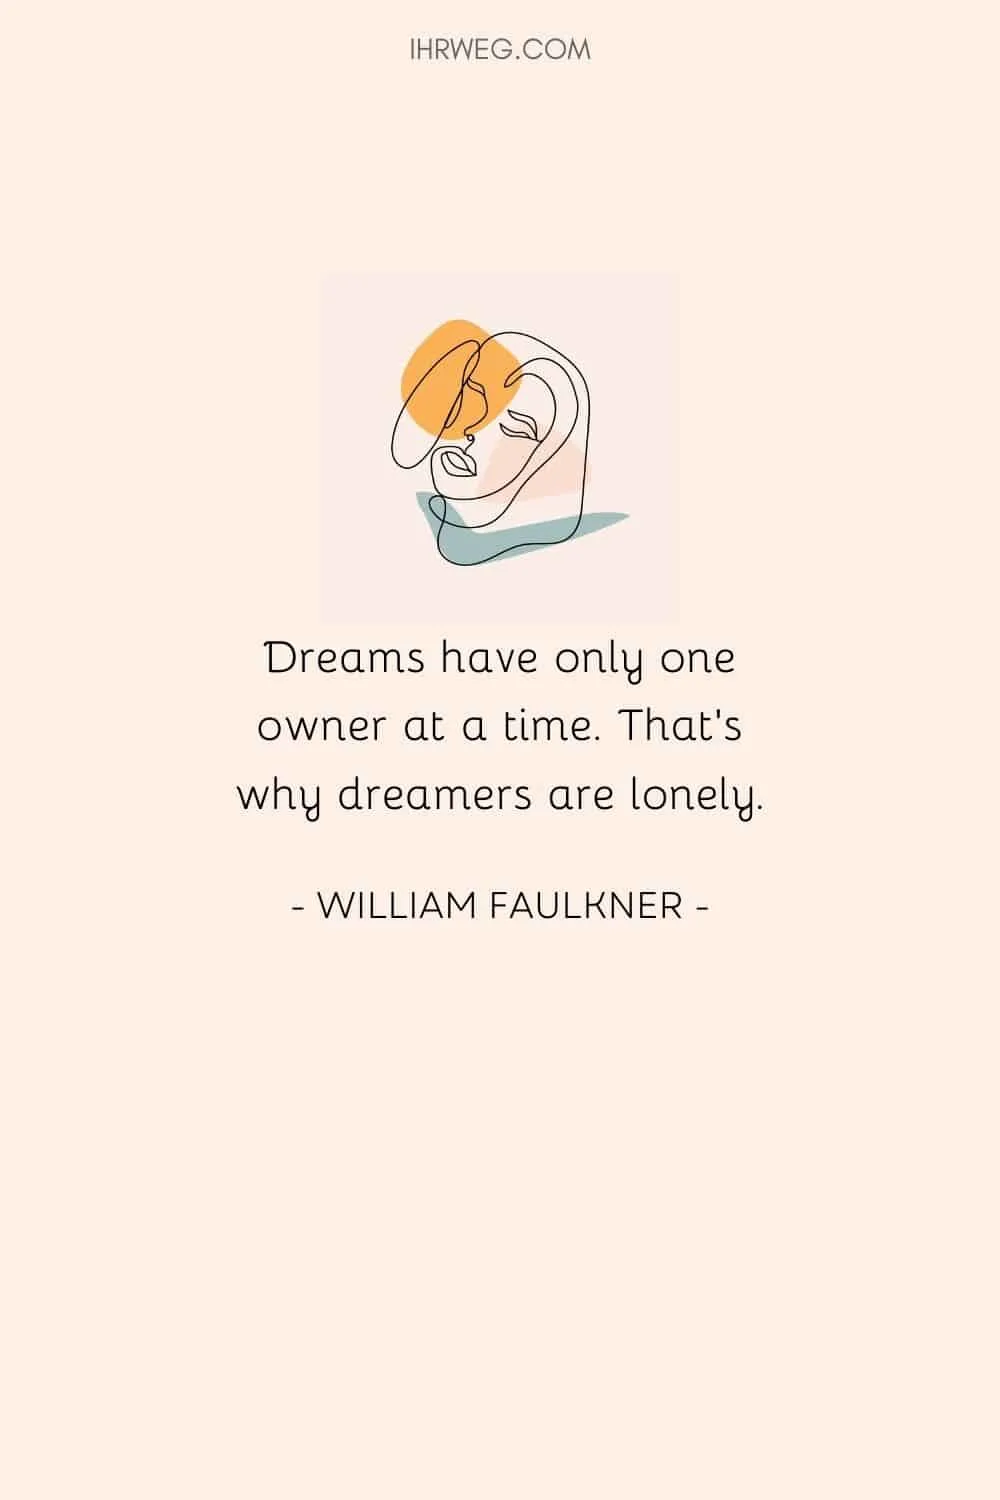 Dreams have only one owner at a time. That’s why dreamers are lonely